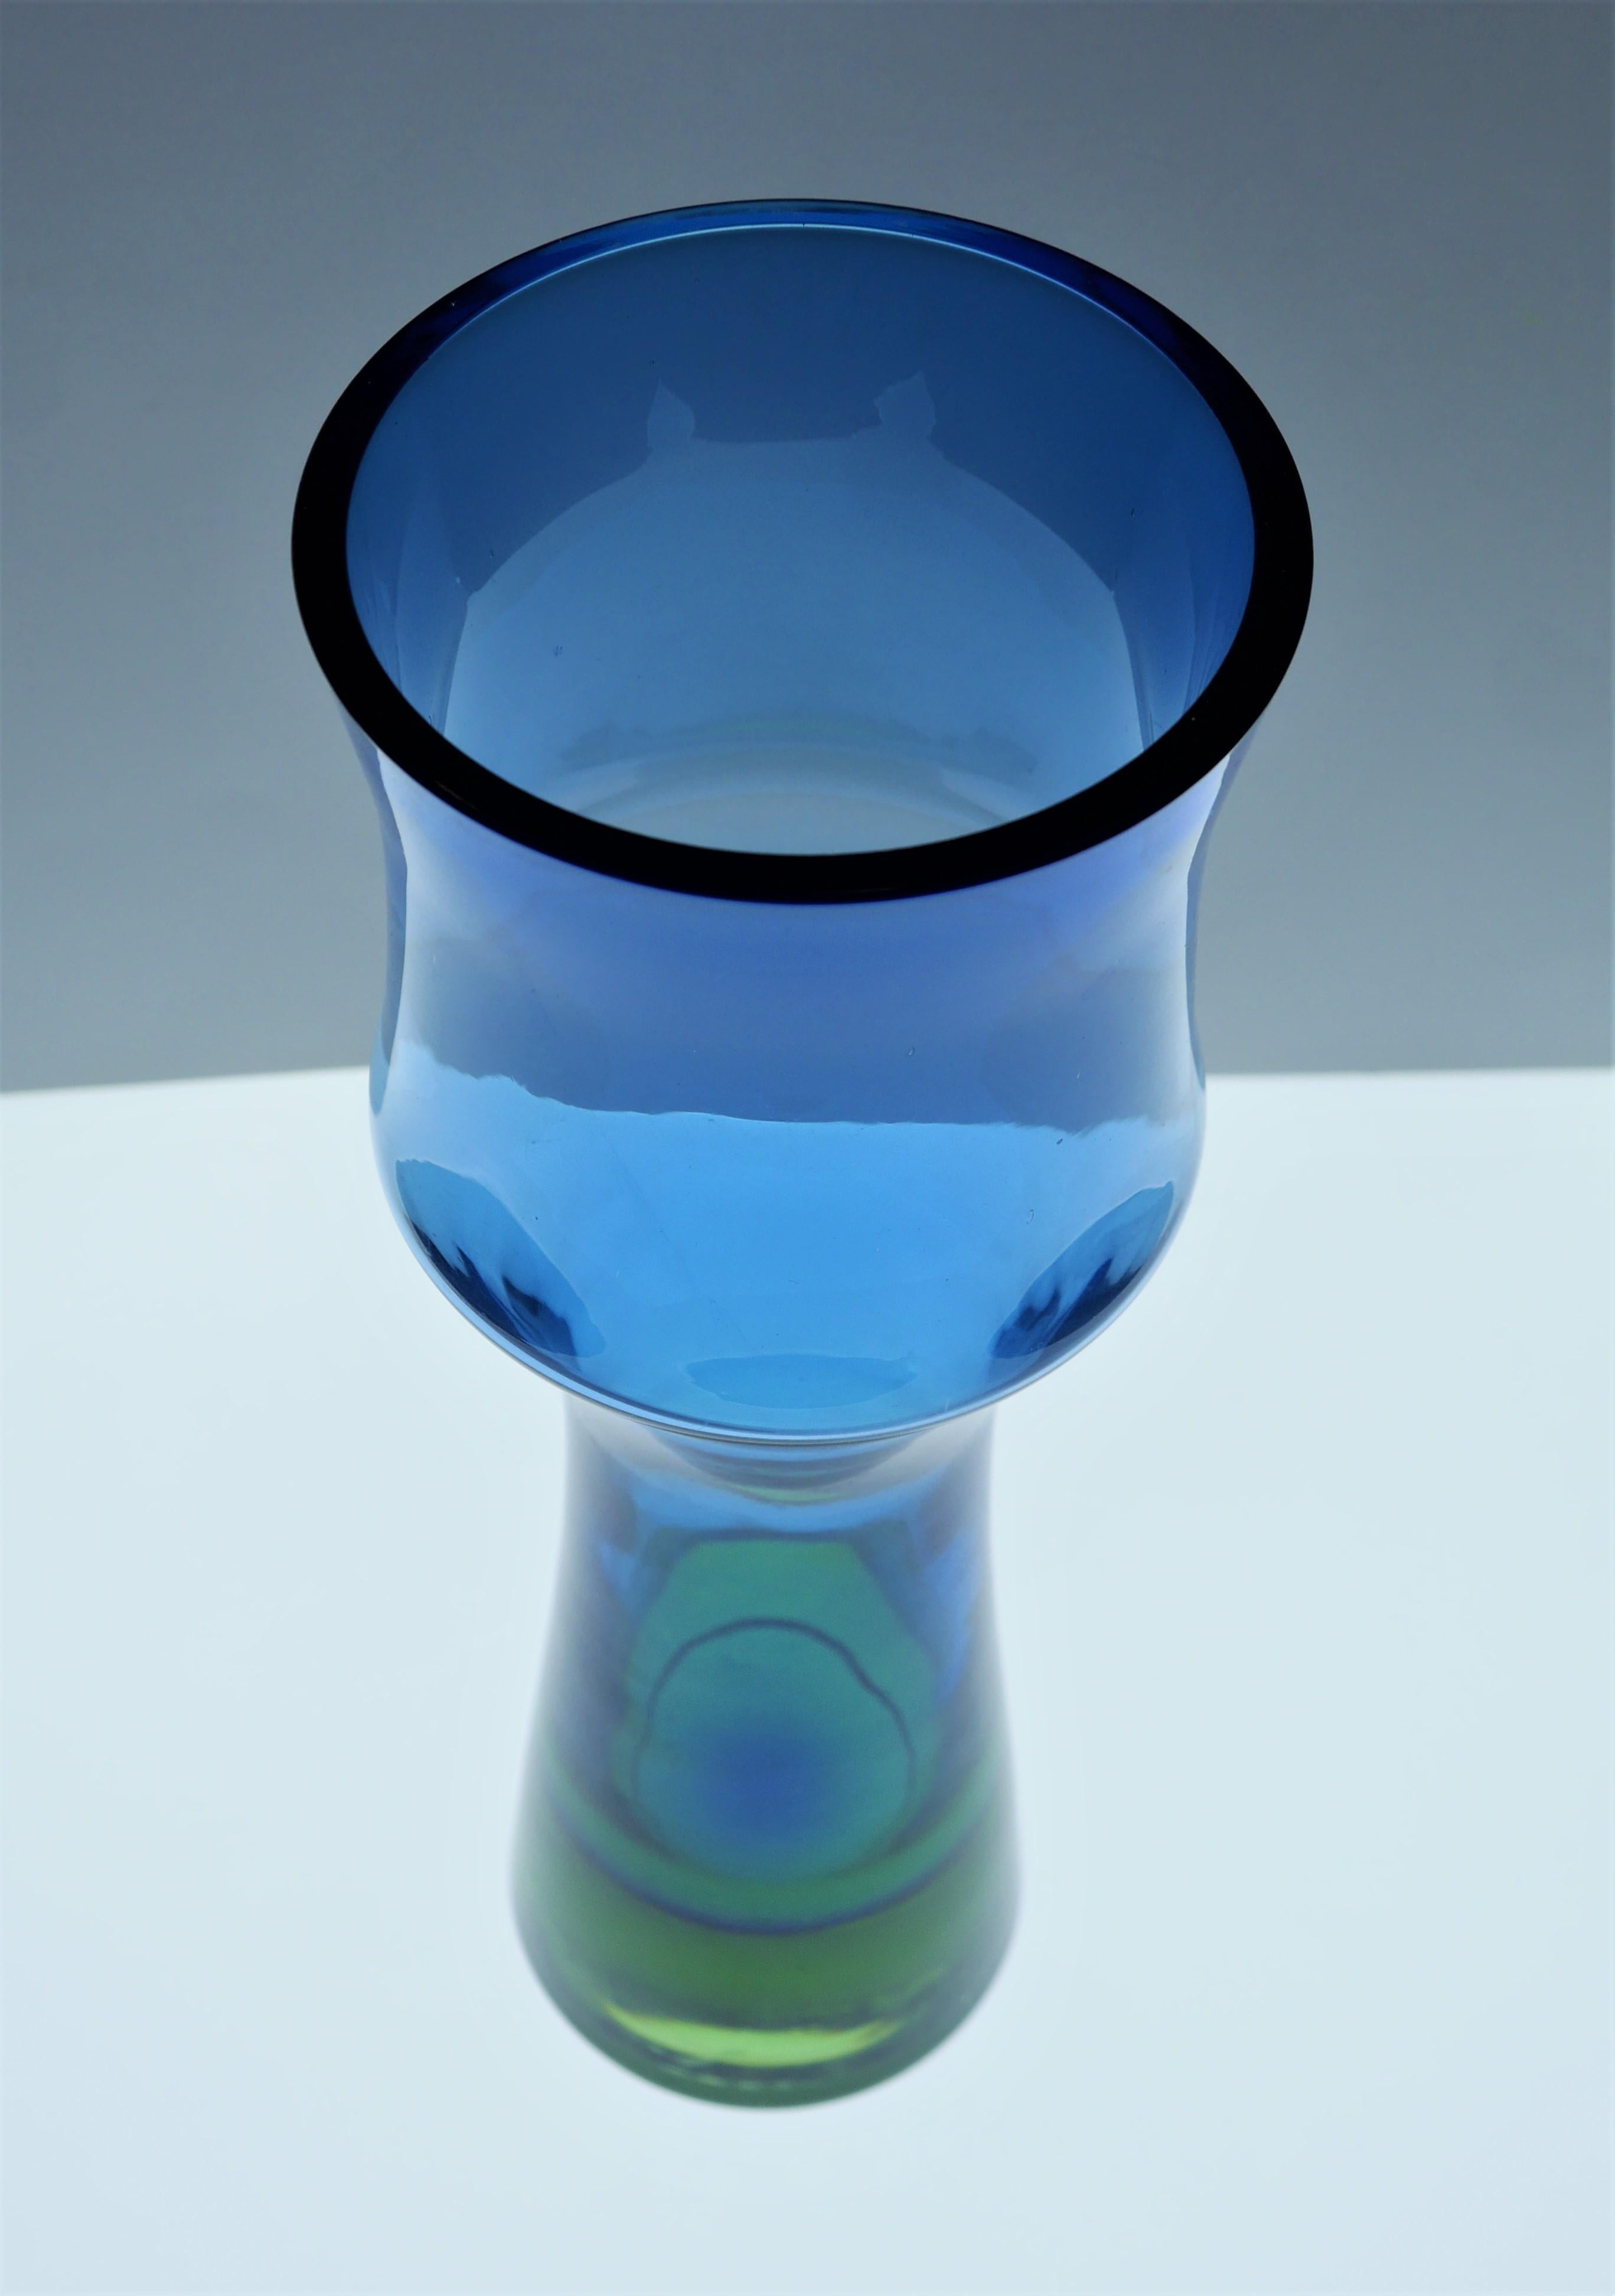 A tall, fluted glass vase in blue and green by Bo Borgström for Åseda Glass works, Sweden. This is very much a statement glass piece either on ots own or in a group, it will add to any setting. This vase has a very nice shape, but it is the colours